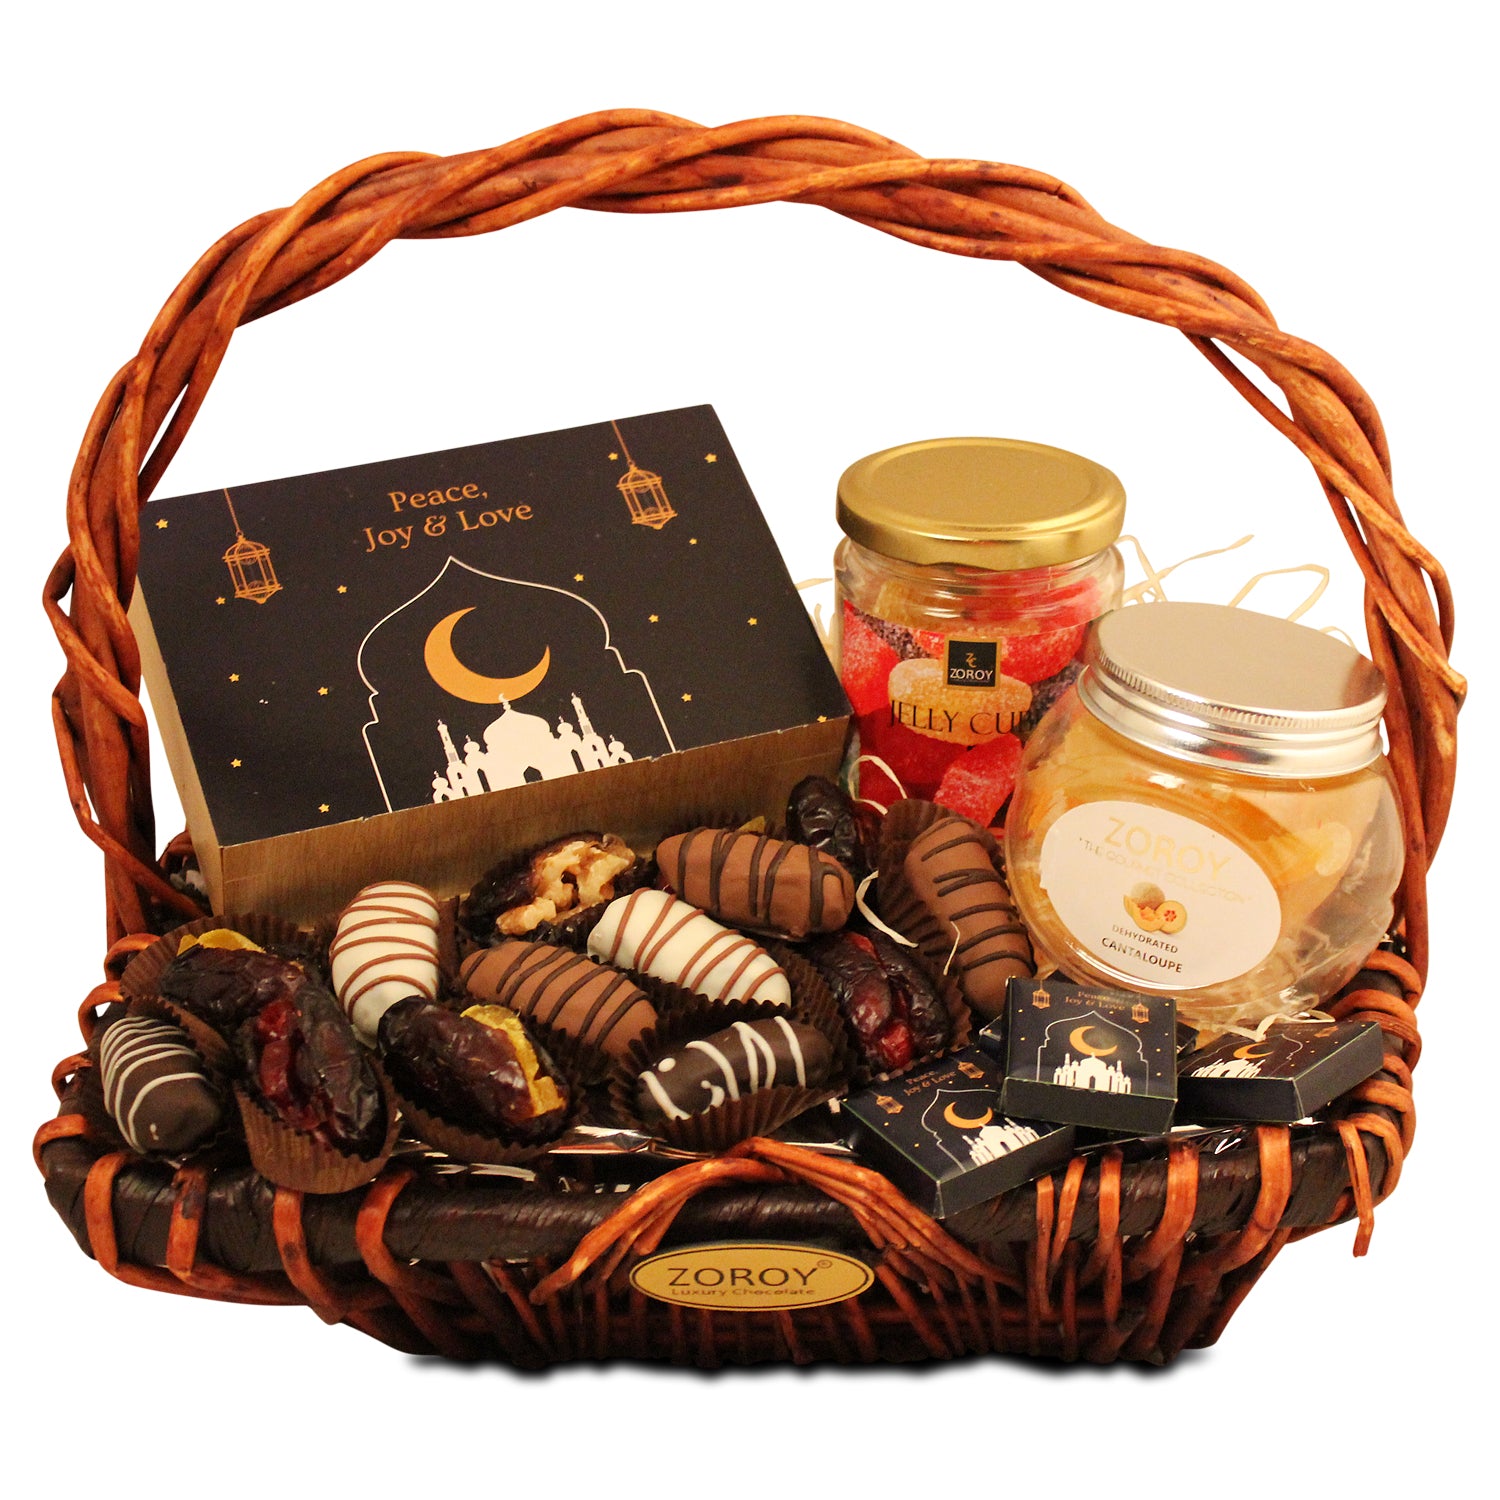 ZOROY Mubarak basket with Dates, Dry fruits with Assorted Chocolate Goodies